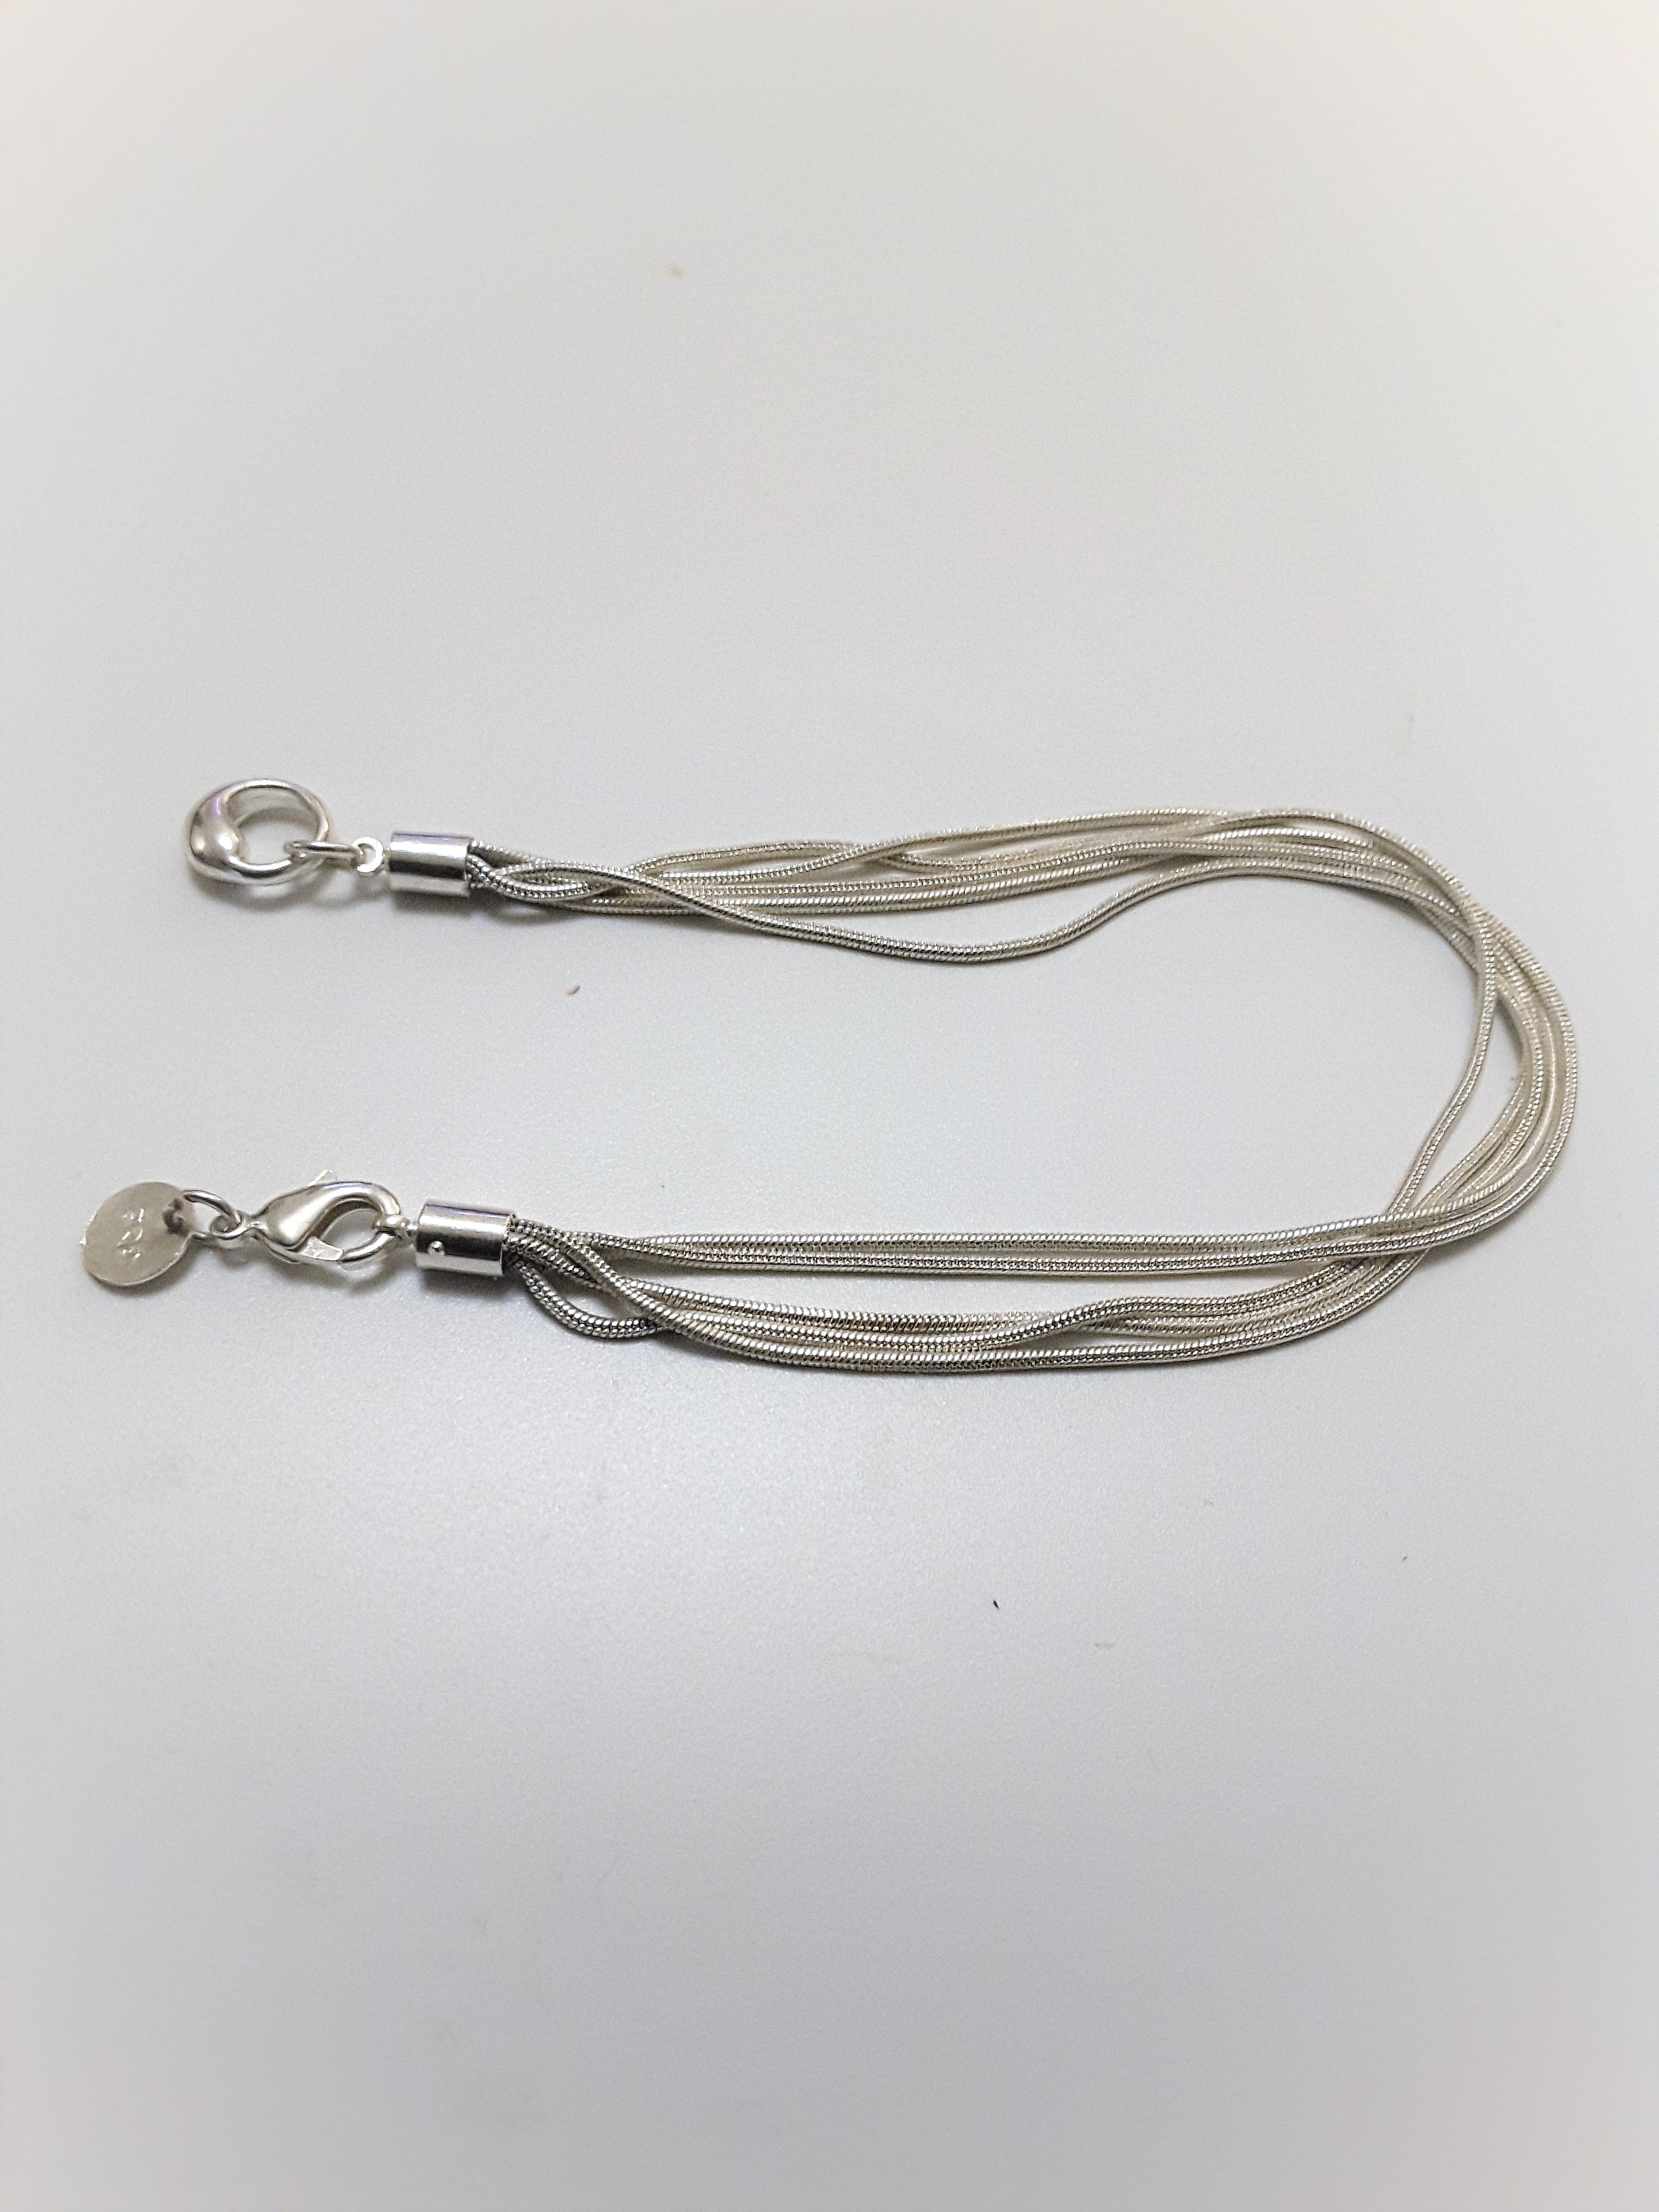 A Pair Of Silver Bracelets. - Image 3 of 3